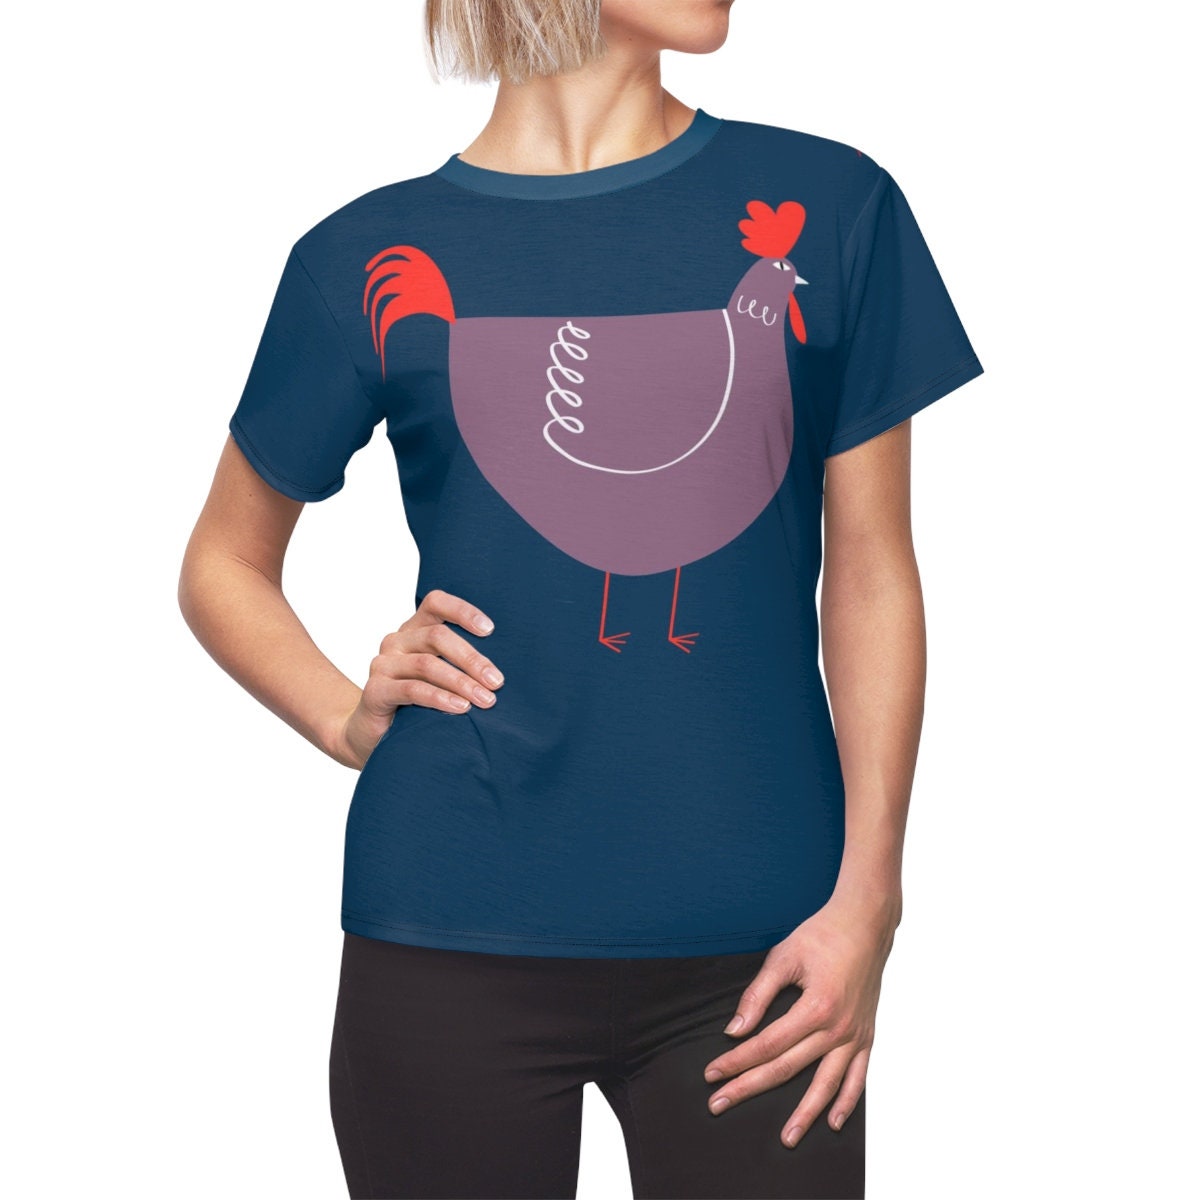 Year of the Rooster / Astrology / Chinese / Zodiac / T-shirt / Tee / Shirt / Rooster / Art / Valentine / Birthday / Clothing / Gift for Her - Chloe Lambertin